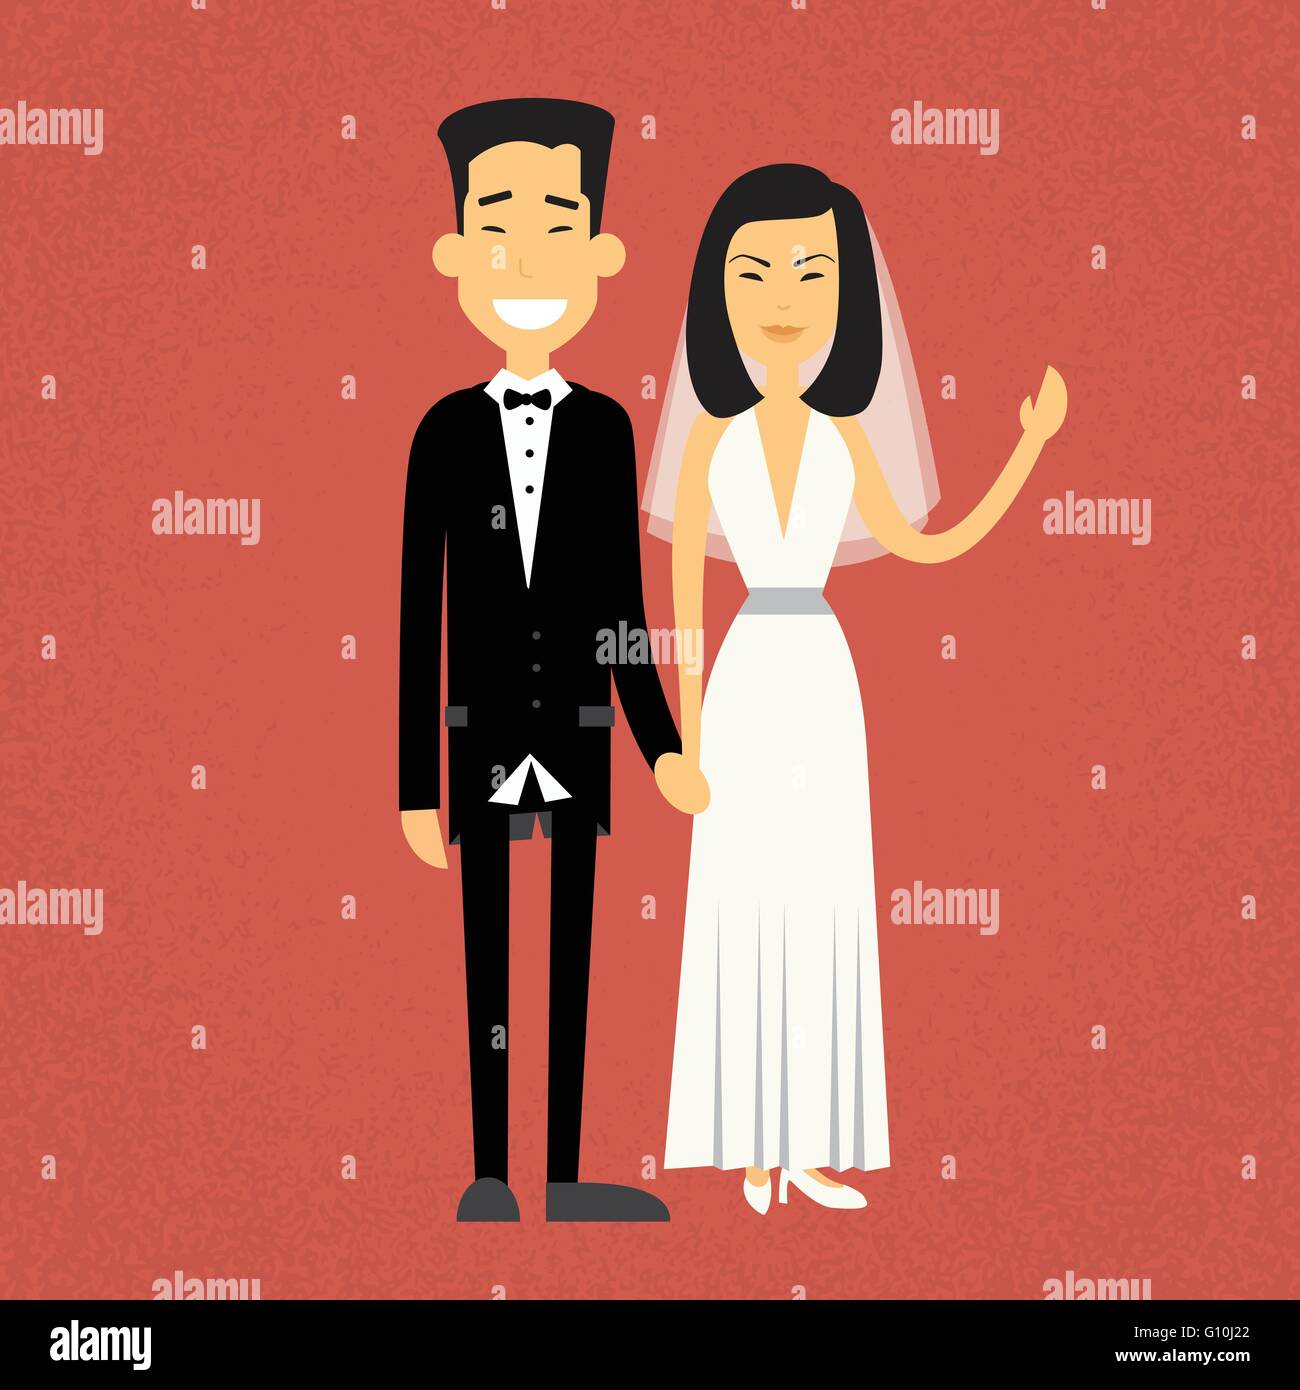 Asian Marriage Couple Fiance And Bride Wear Wedding Dress Holding Hands Flat Design Vector Illustration Stock Vector